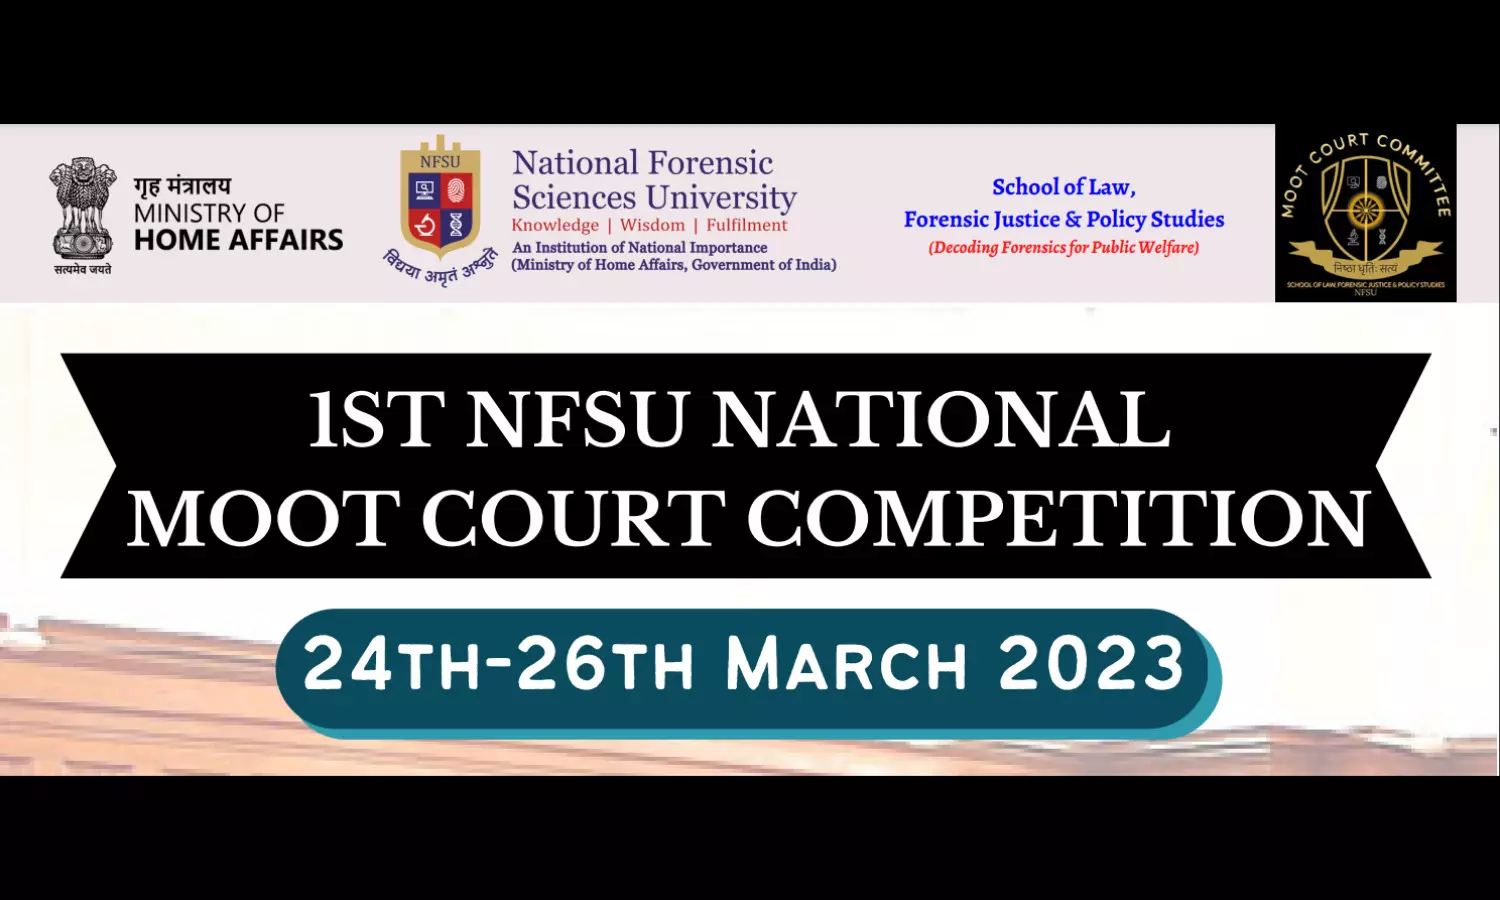 1st NFSU National Technological Moot Court Competition | National Forensic Sciences University | 24th - 26th March 2023